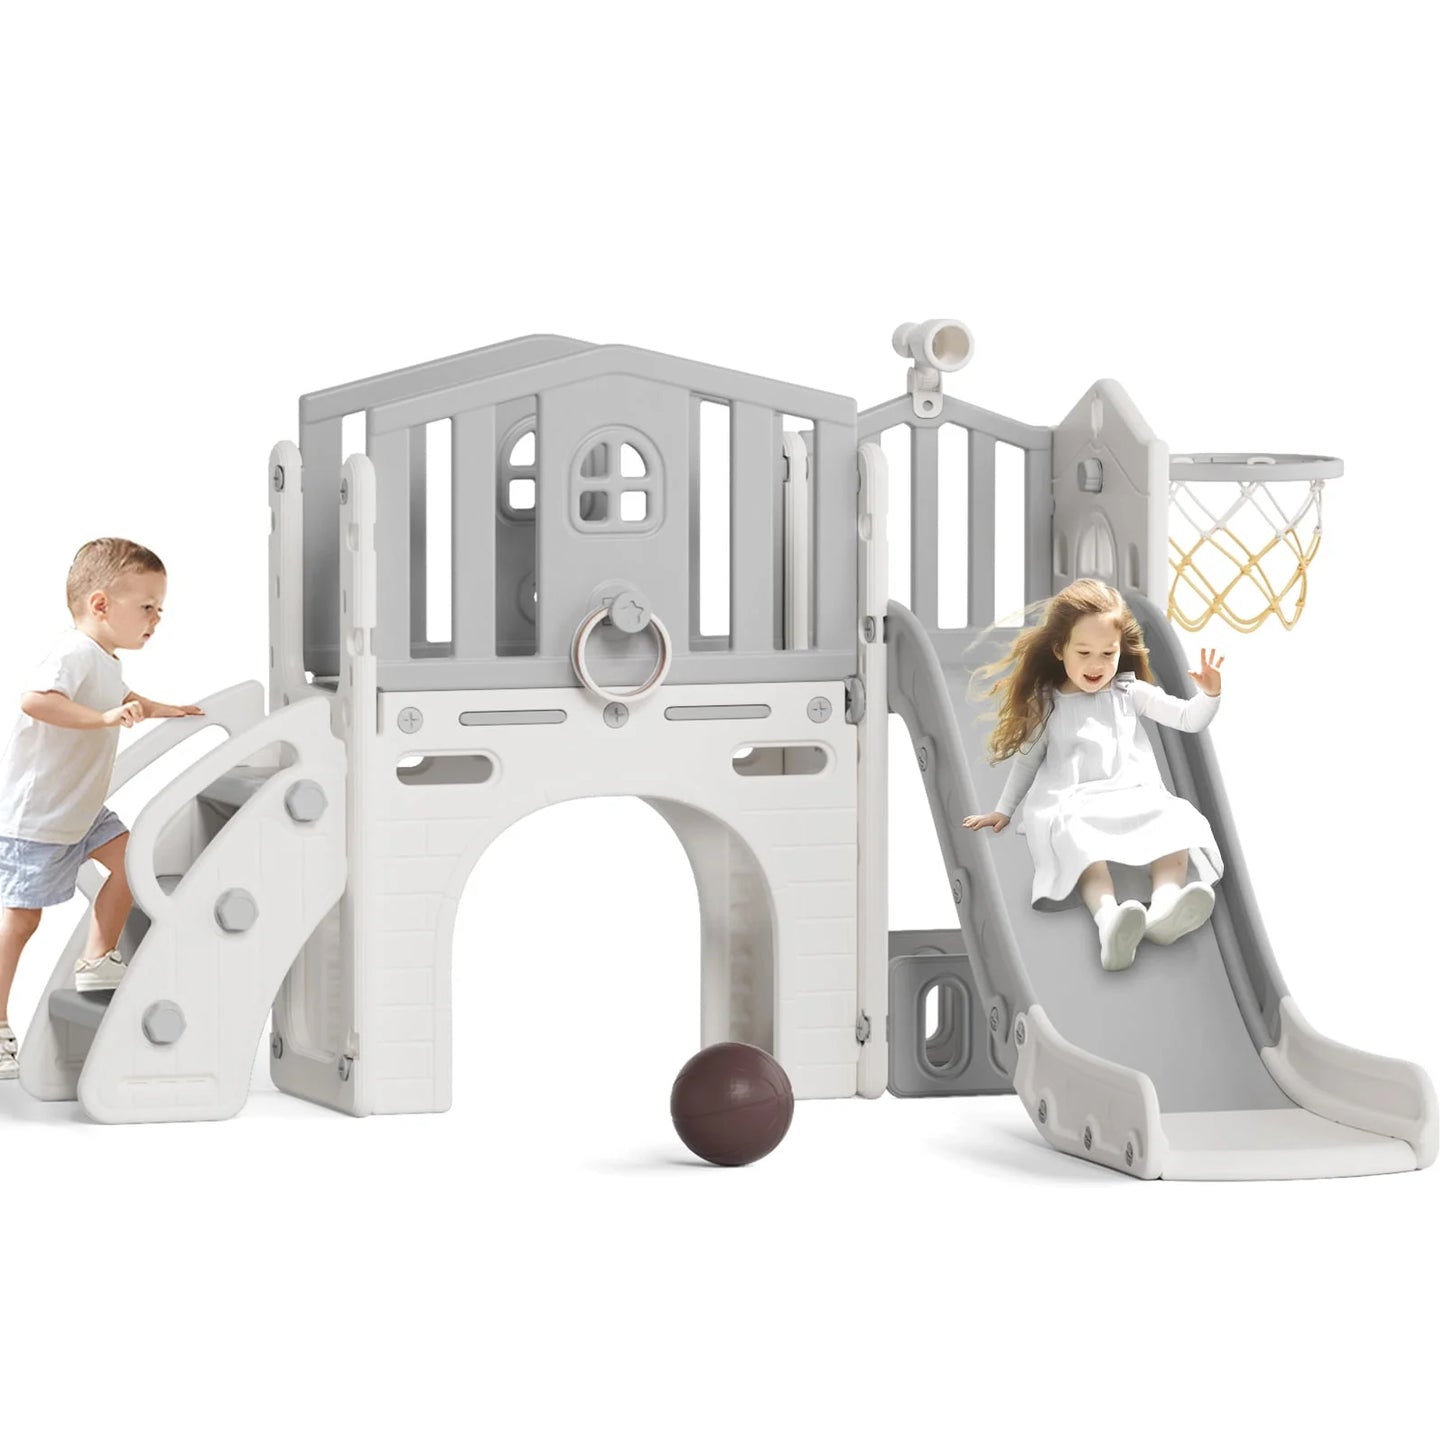 8 in 1 Kids Slide Set with Climber